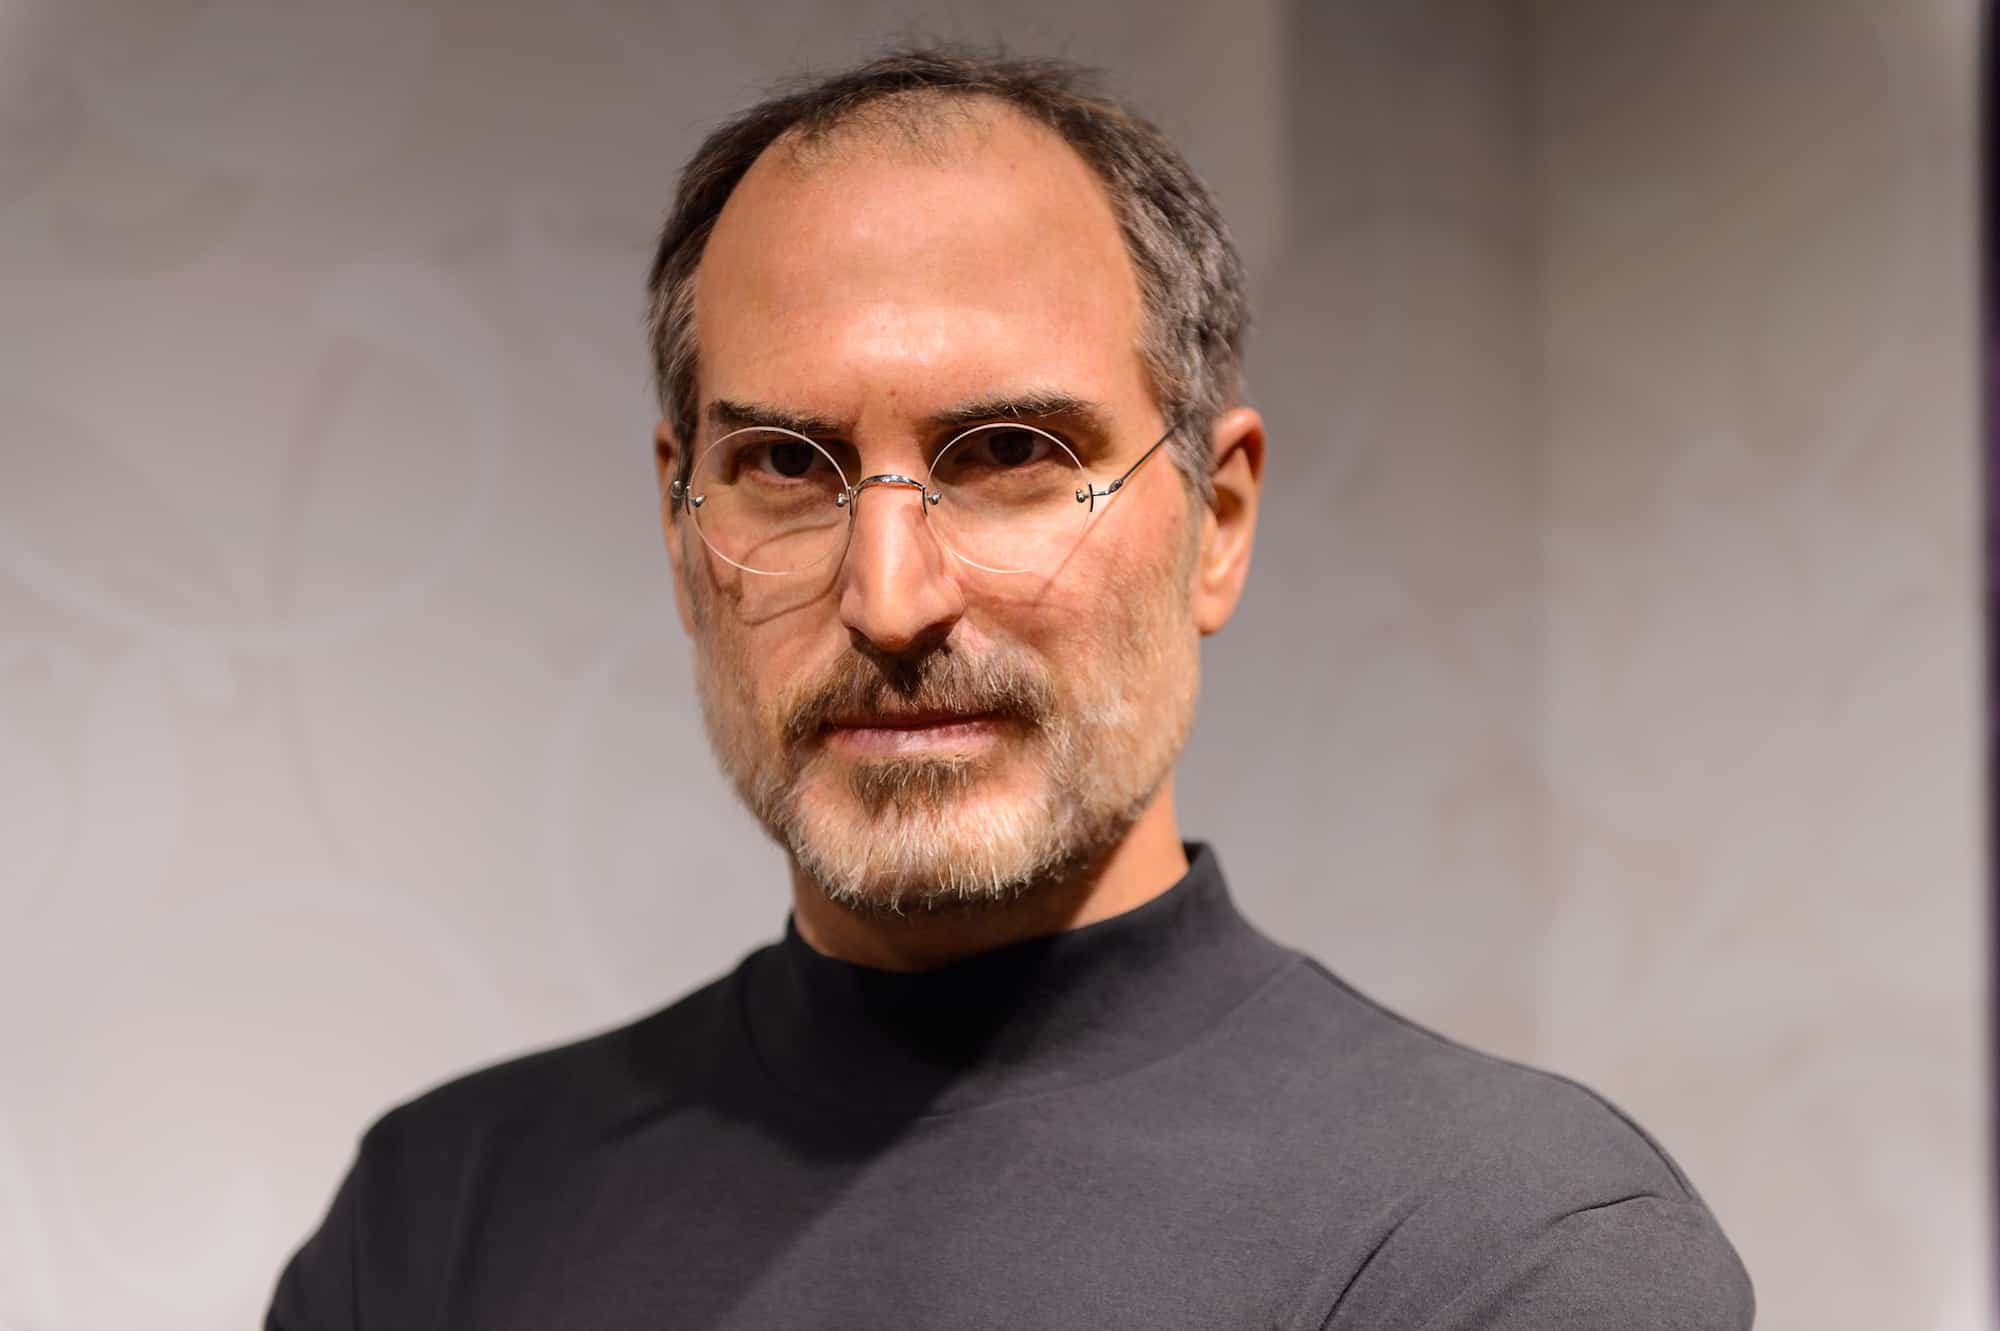 Steve Jobs Net Worth Who Did He Leave His Money To